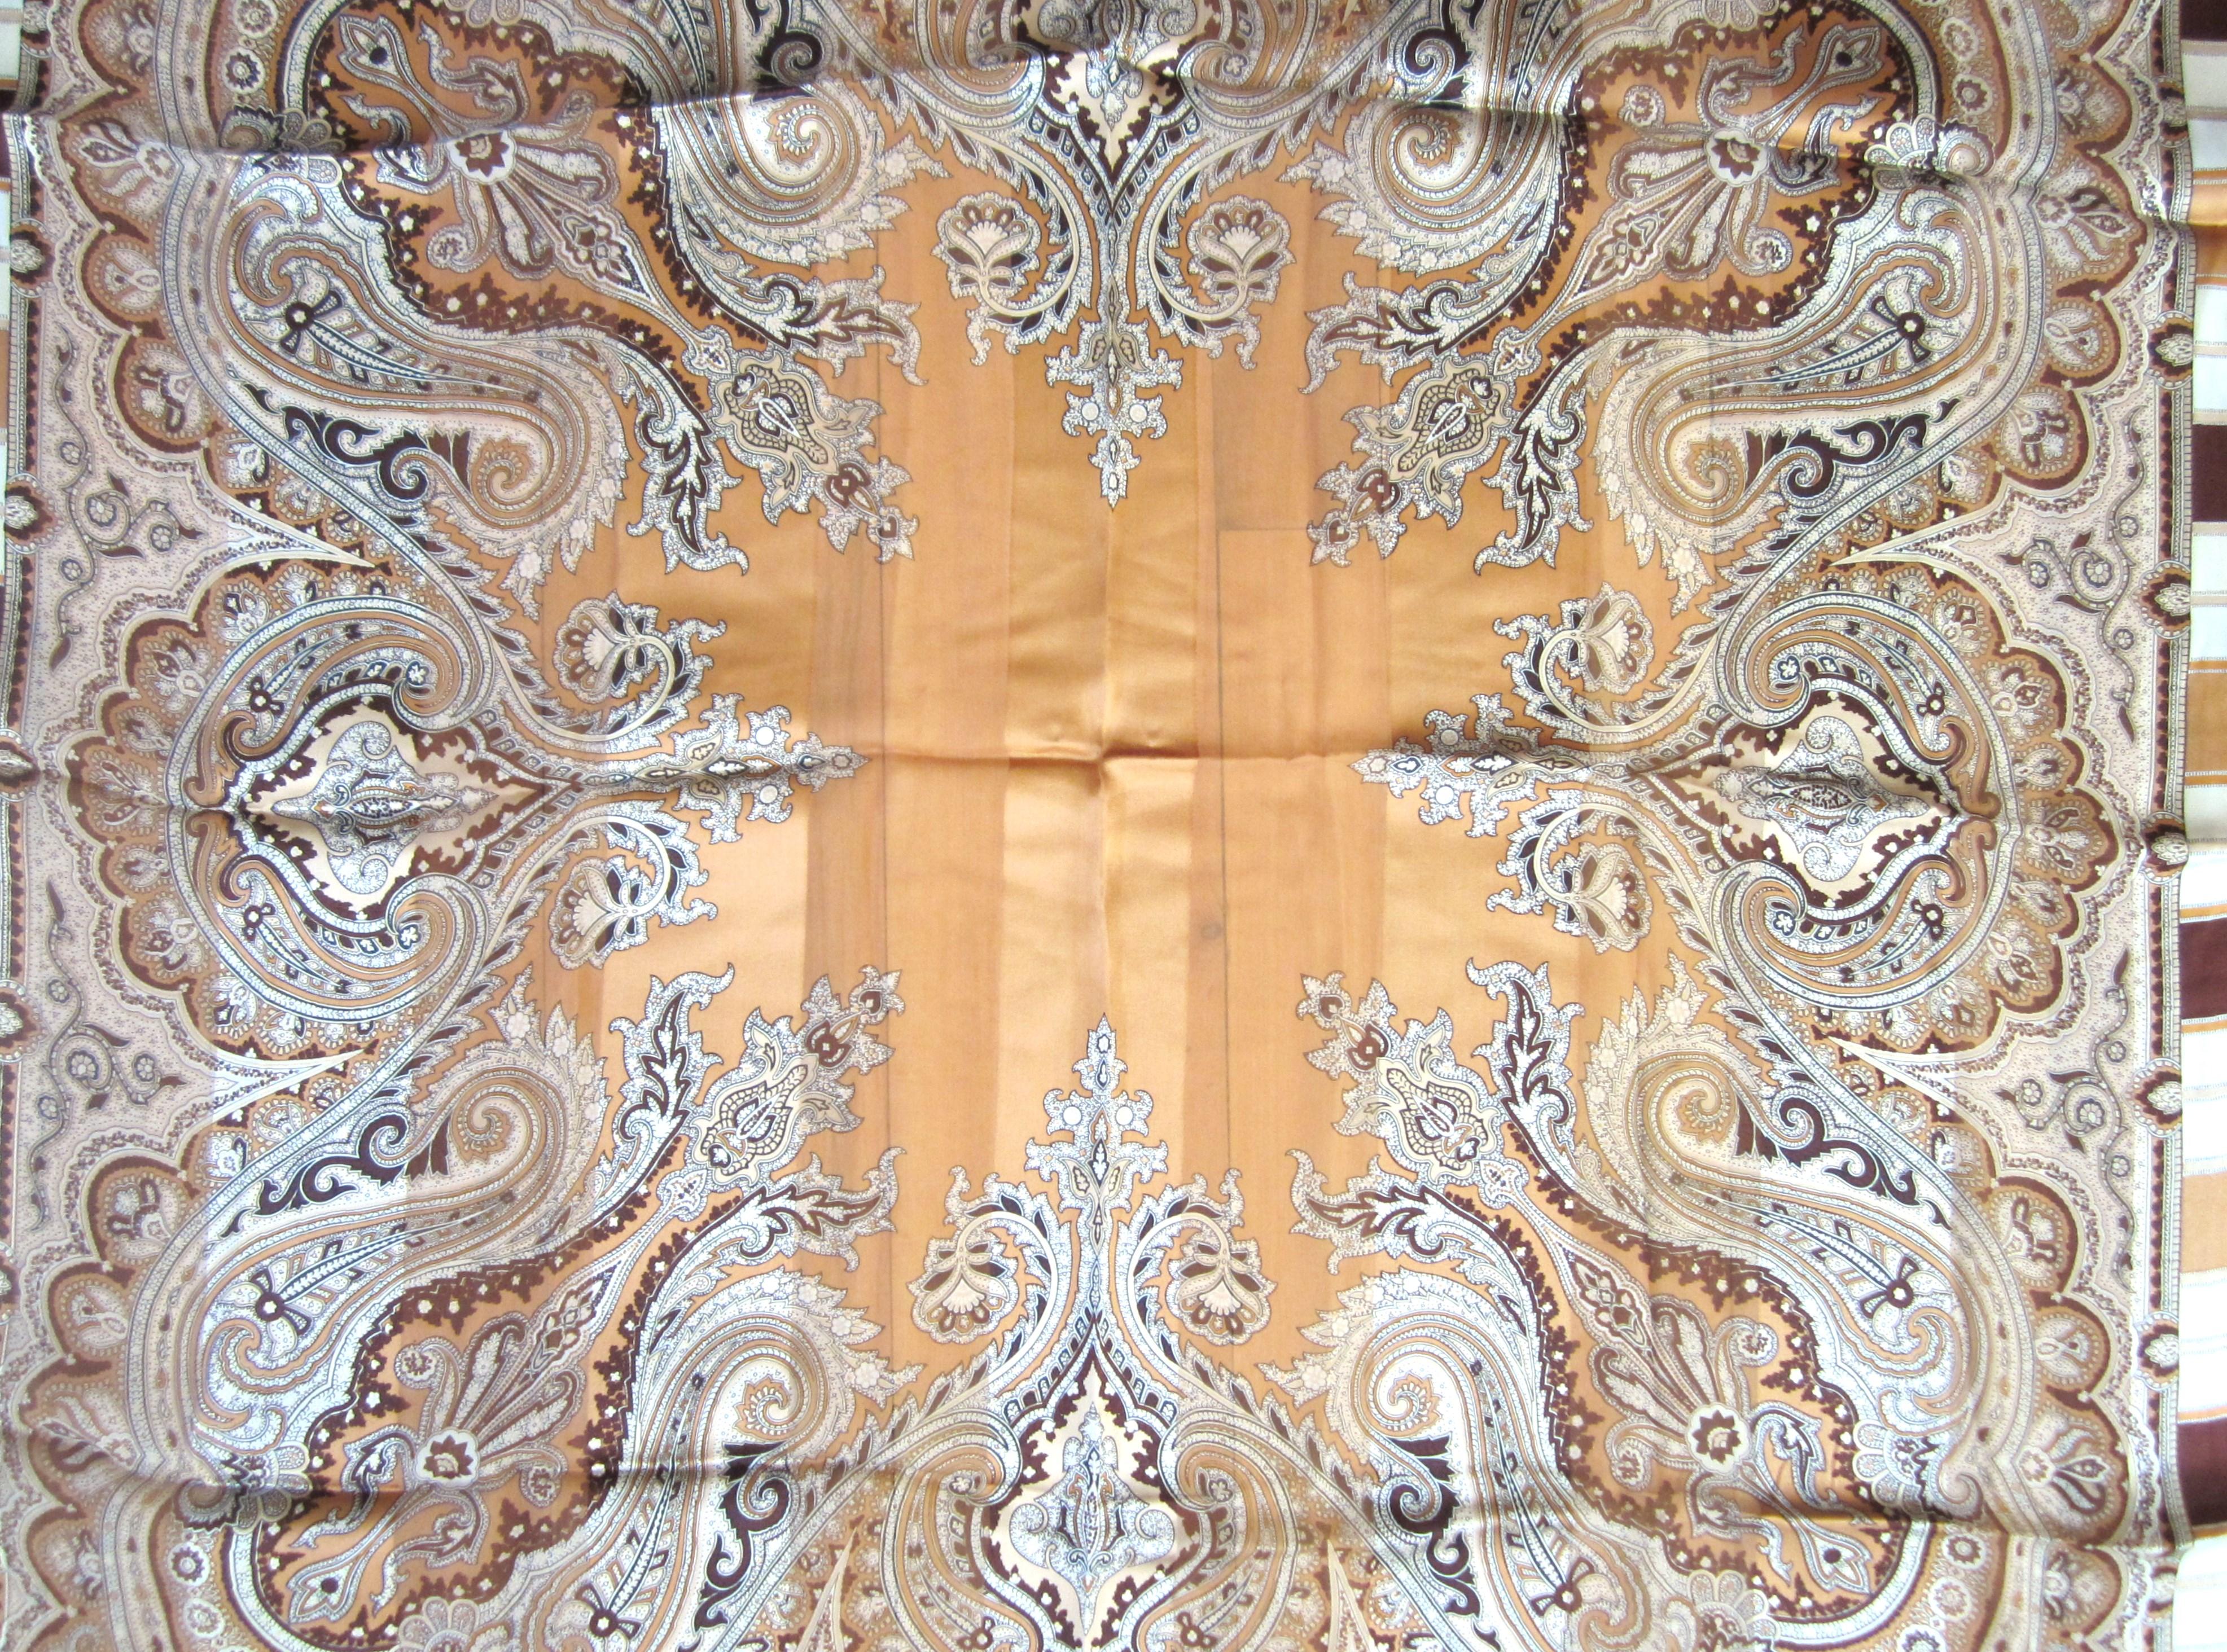 Silk Escada Scarf in a lovely brown paisley motif. Purchased in the late 1980s early 90s at Neiman Marcus. Measuring 36 x 36 Stored away till now, never worn. We have a vast inventory of scarves on our storefront. This is out of a massive collection